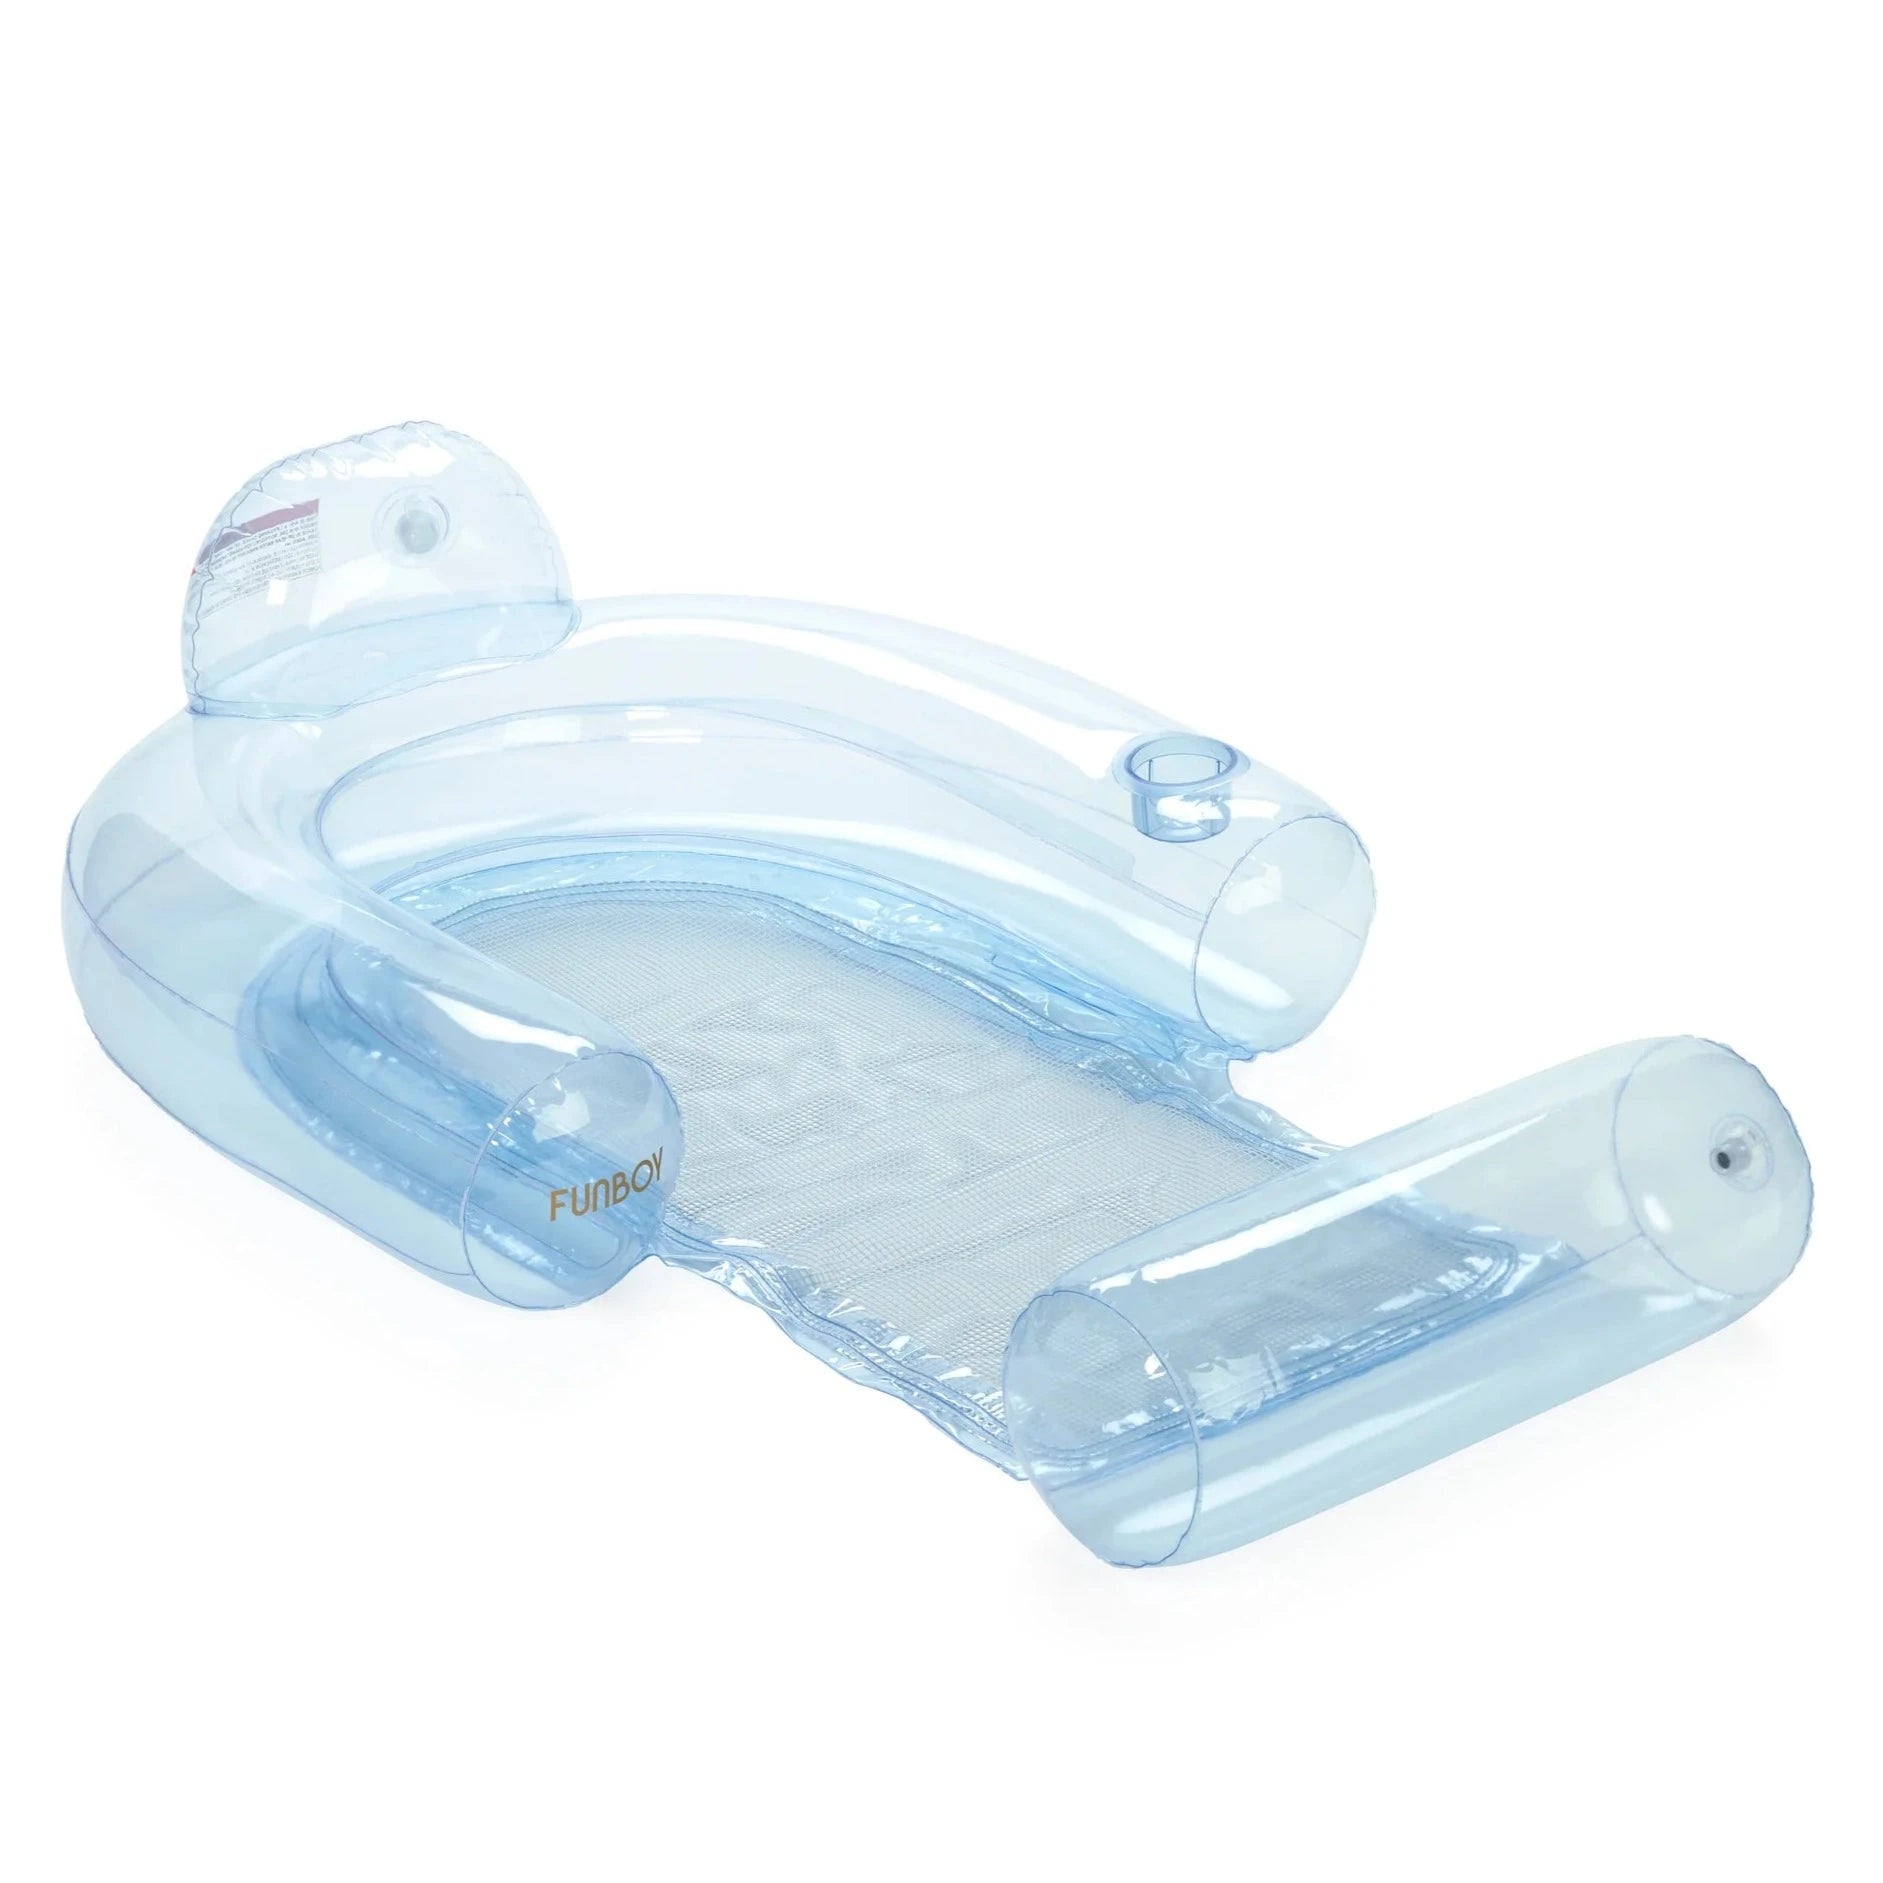 Clear Blue Mesh Chair Pool Float - The Preppy Bunny